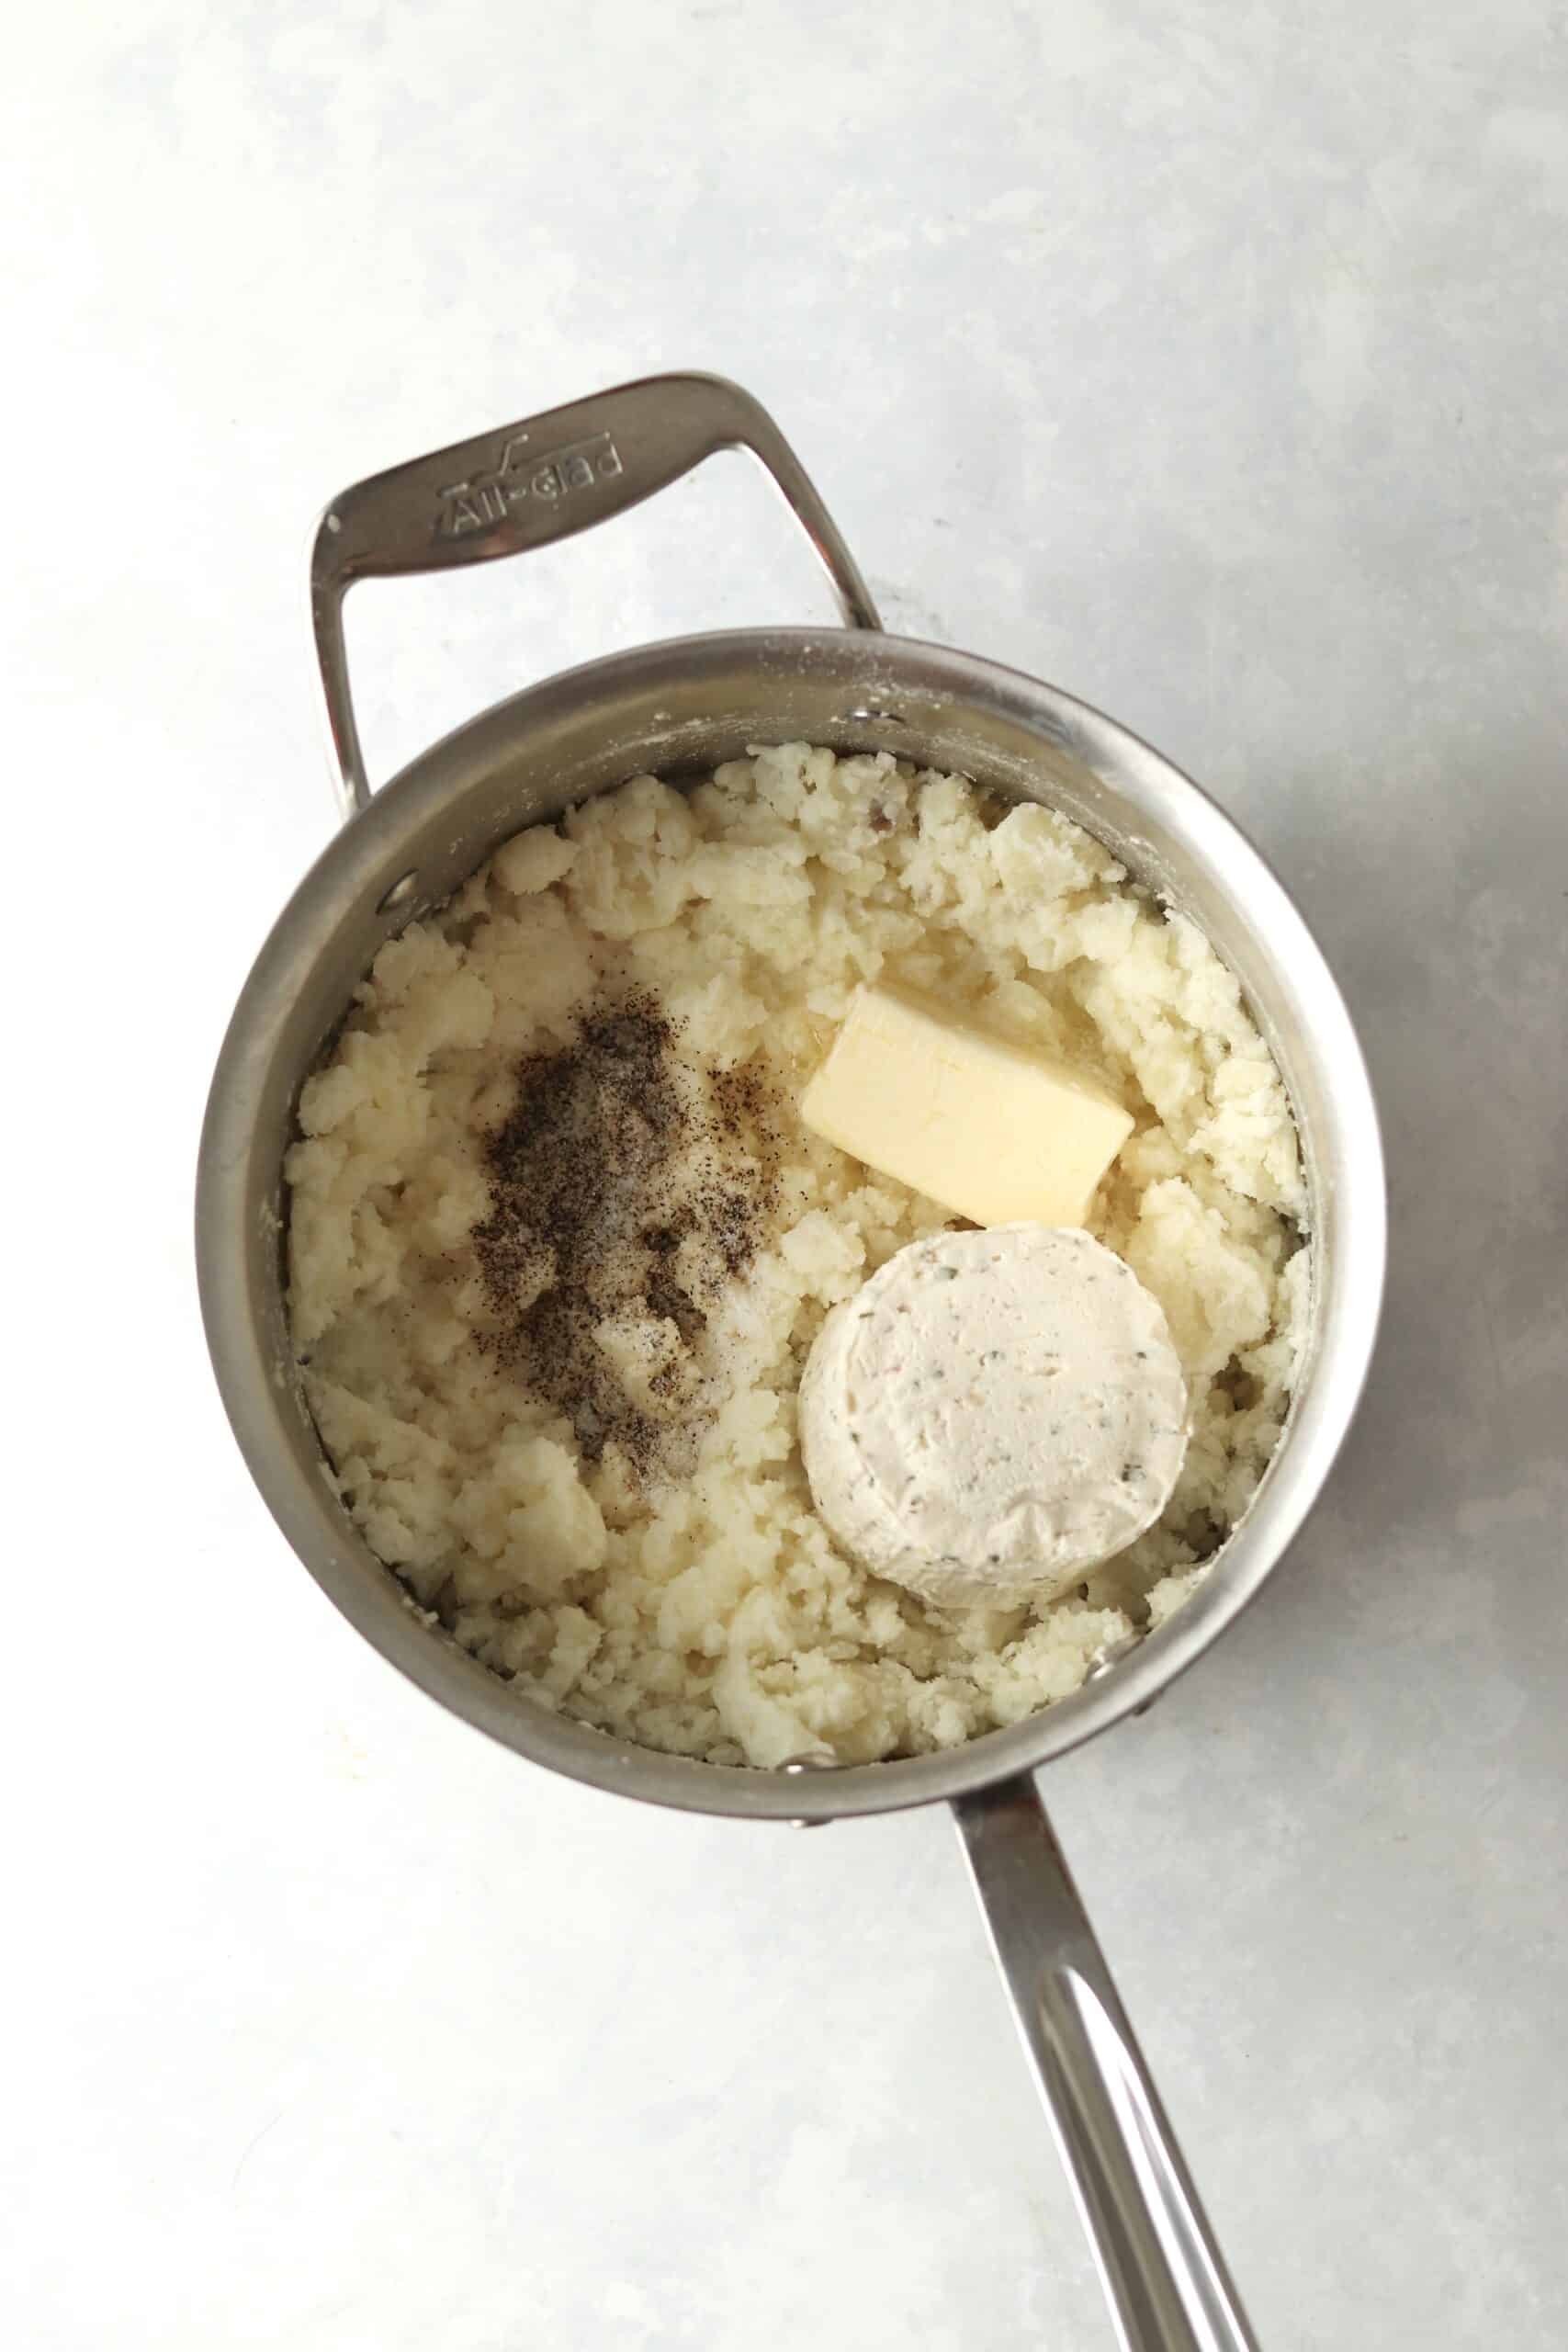 mashed potatoes with Boursin cheese and butter